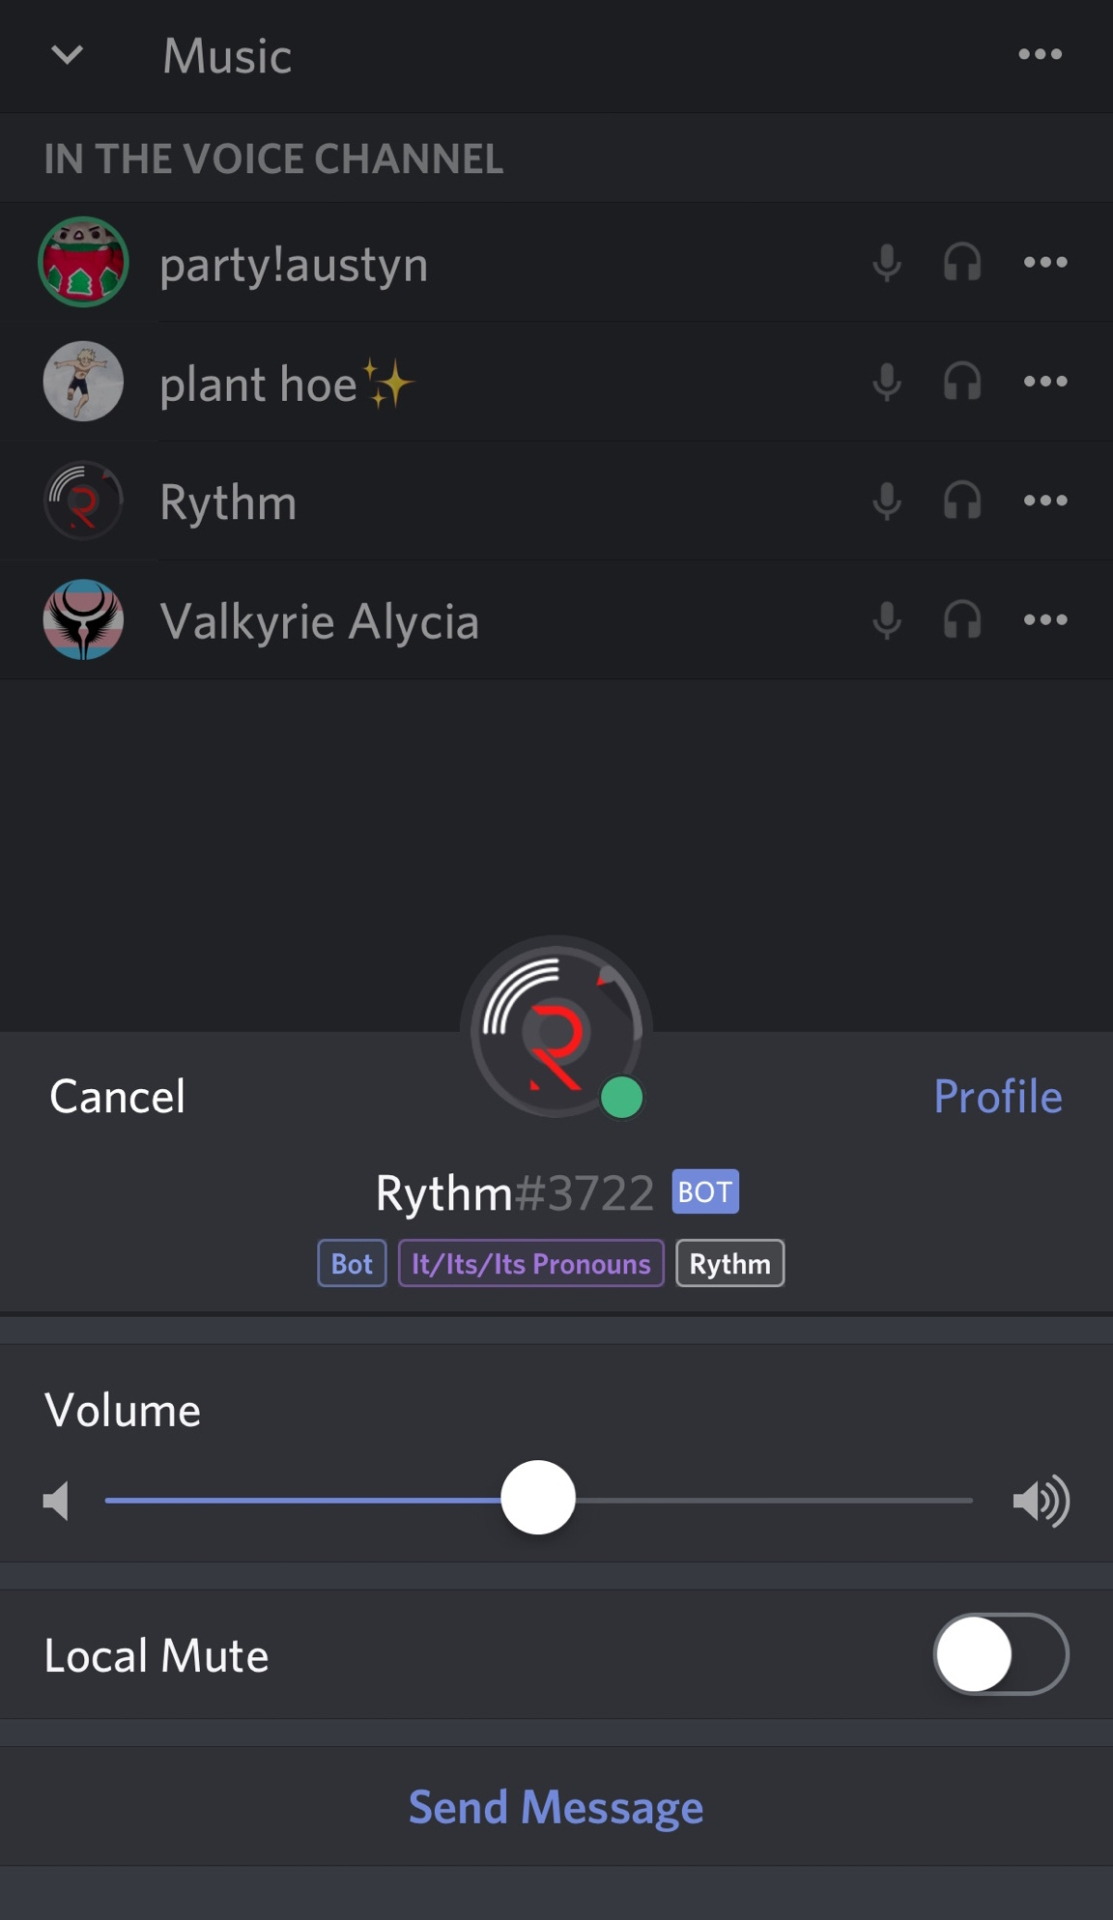 How To Add Rythm Bot To Voice Channel